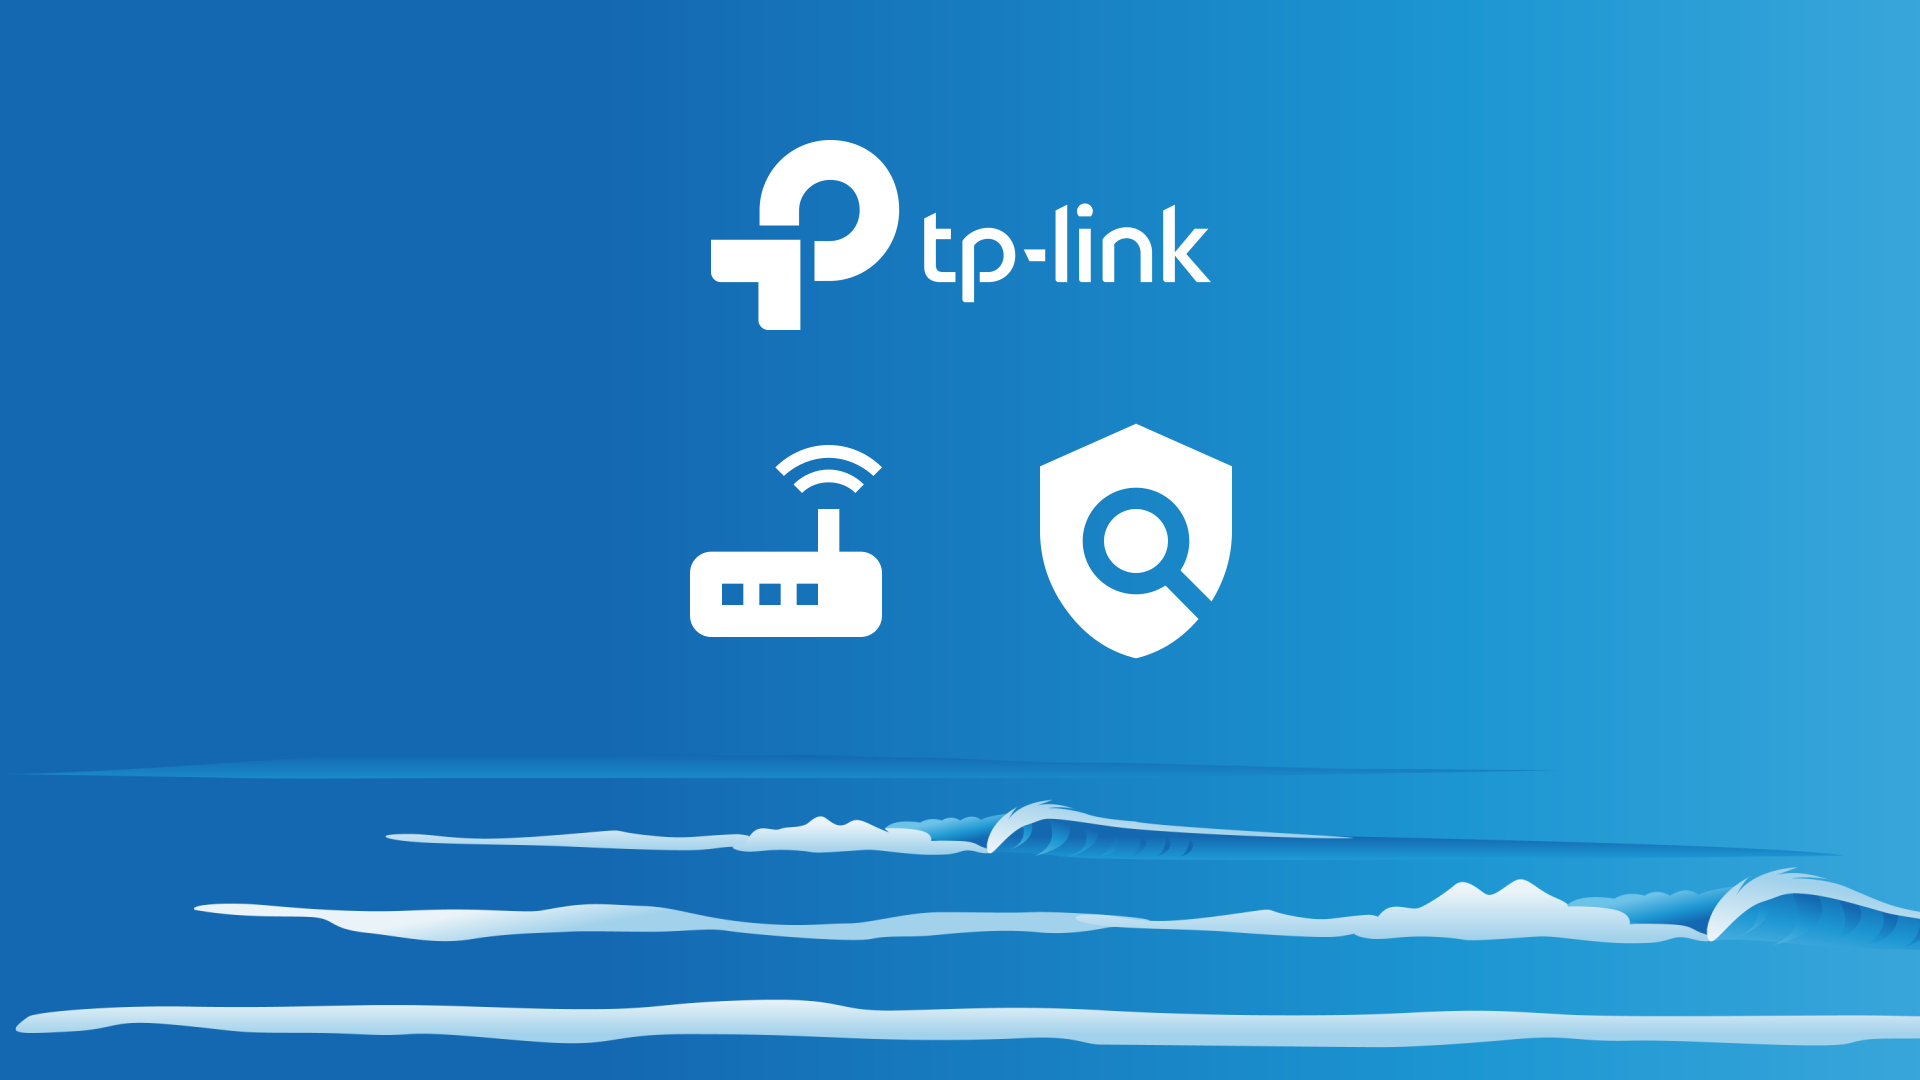 Sea background with TP-Link logo and router icon